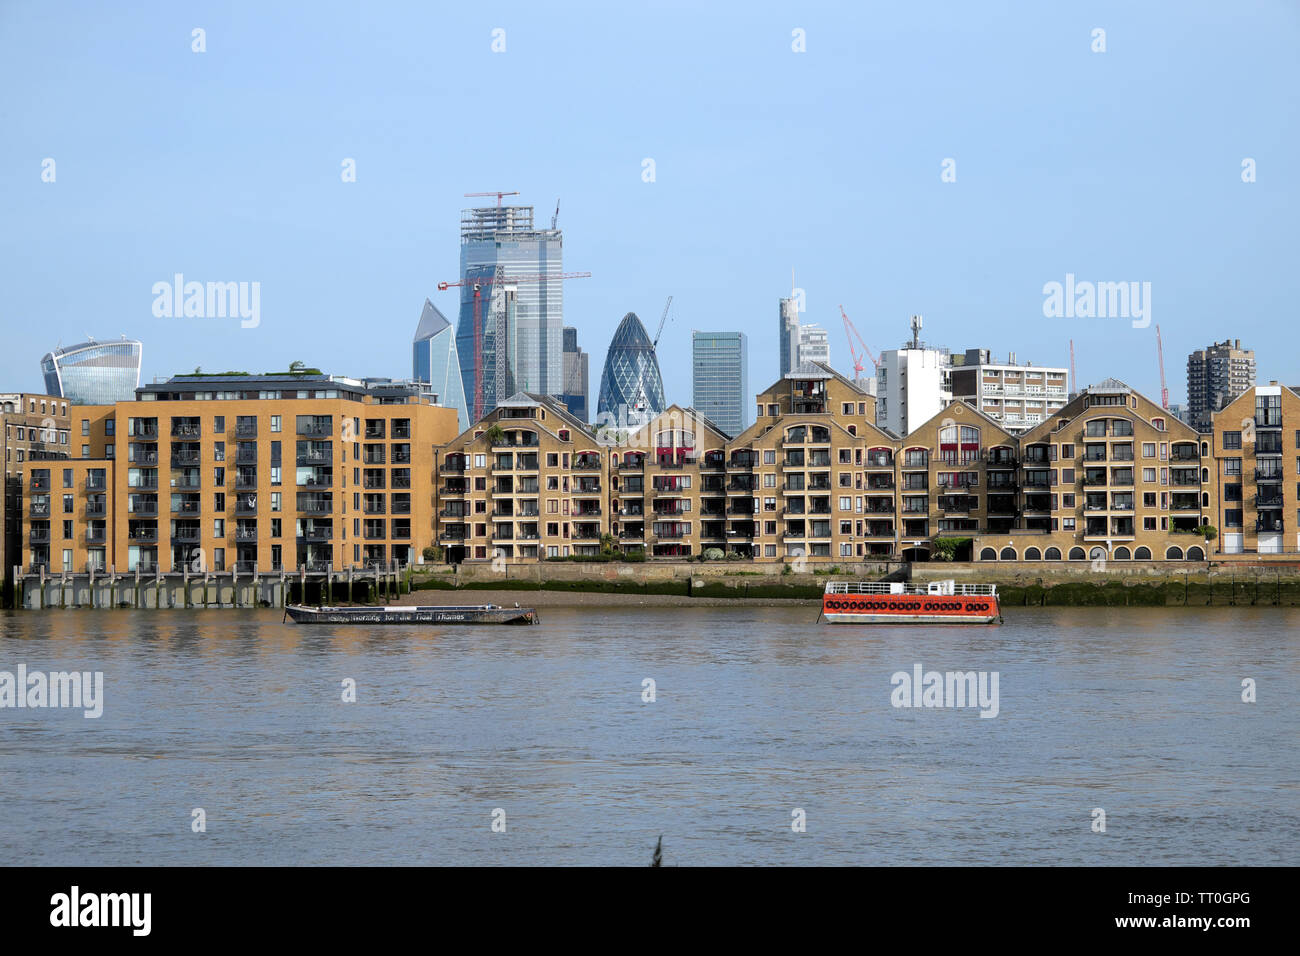 River Thames near Wapping riverside apartments with a cityscape skyline  view of the City of London skyscrapers London England UK    KATHY DEWITT Stock Photo